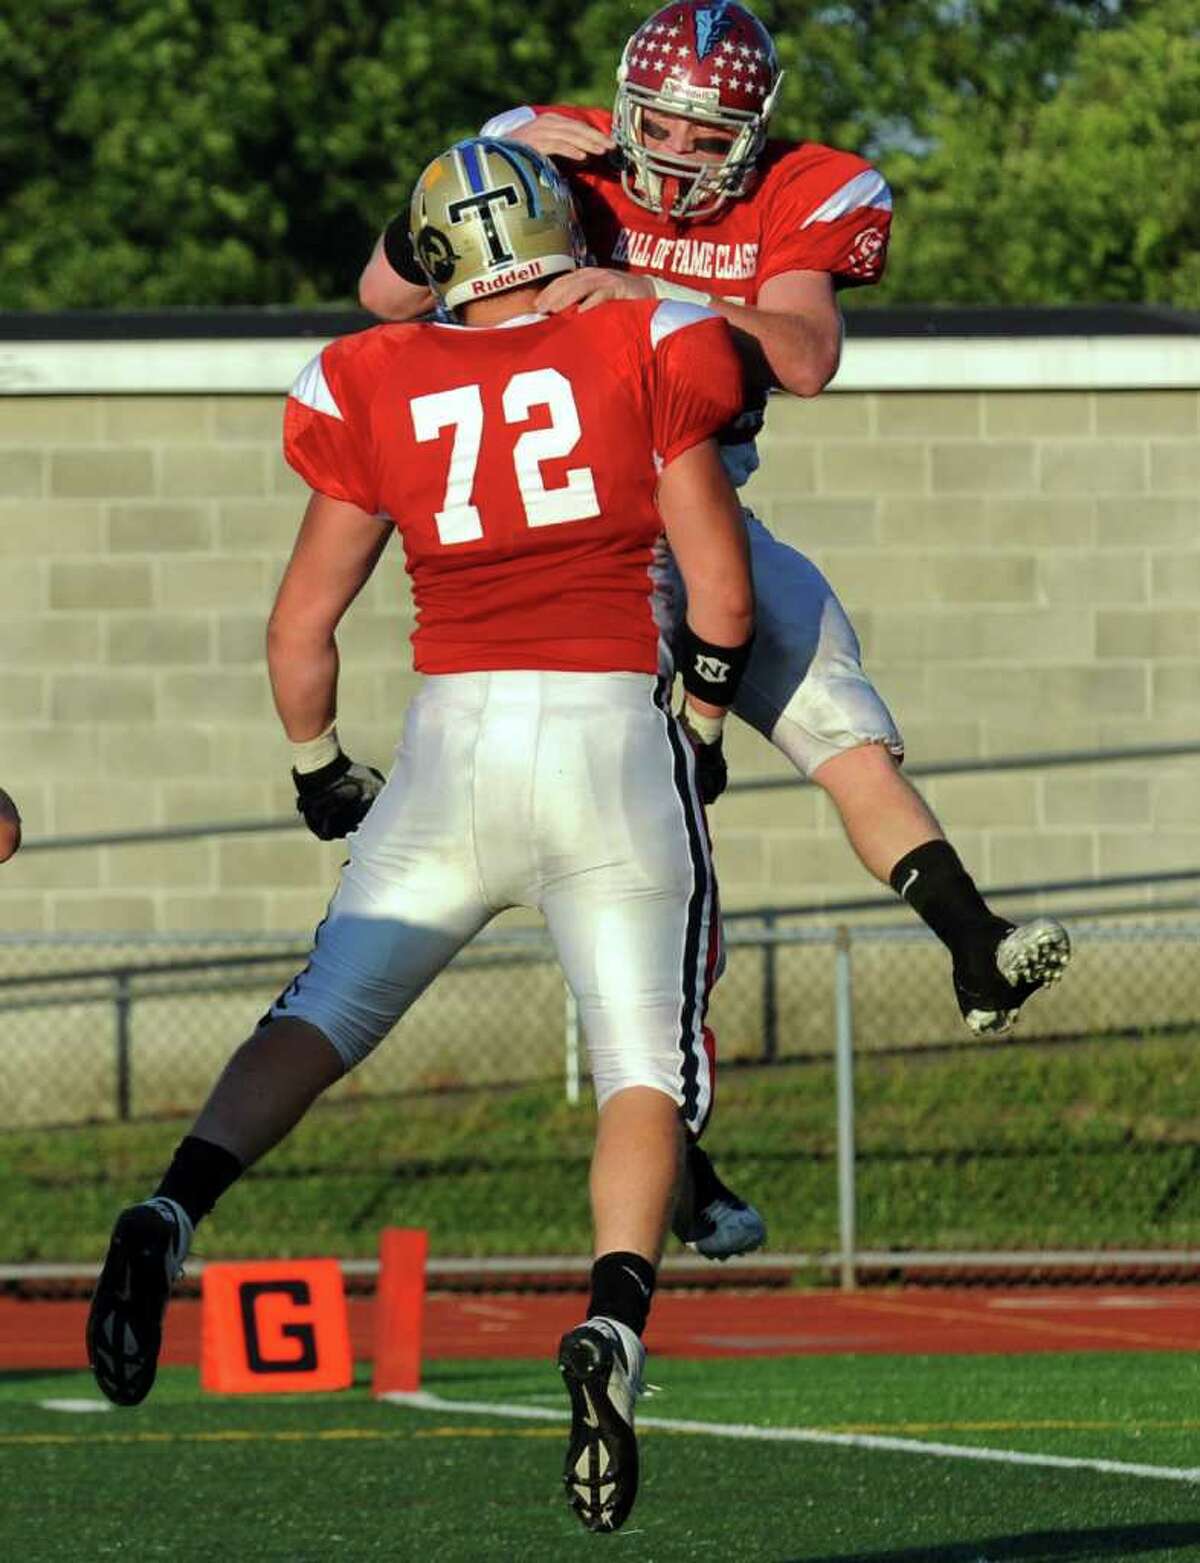 St. Joseph's #44 Tyler Matakevich, right, leaps in the air to celebrate his touchdown with teammate #72 Matt Datin, during Fairfield County vs. New Haven County All-star football action in West Haven, Conn. on Saturday July 9, 2011.